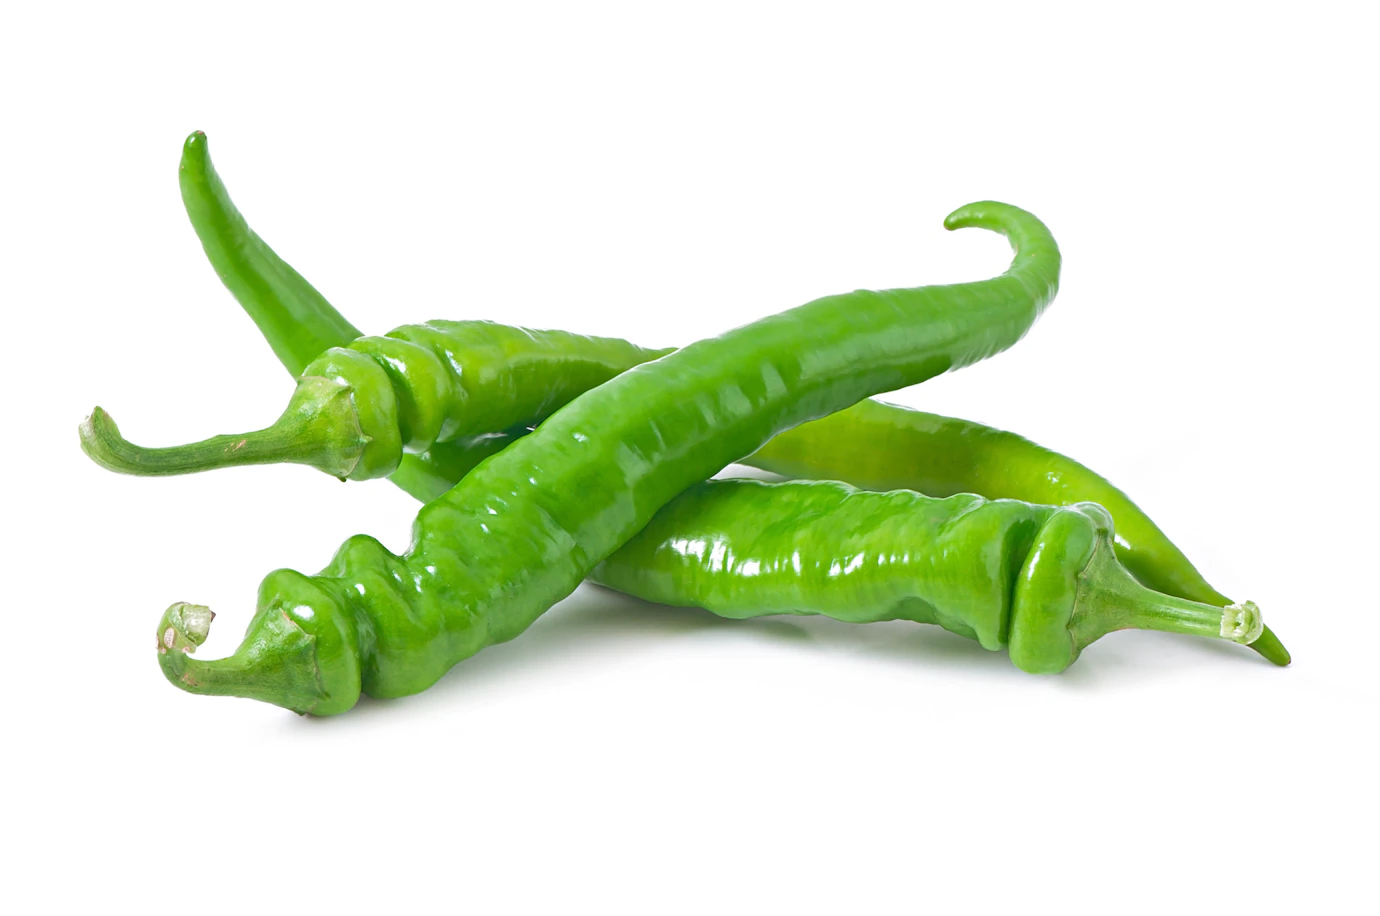 green-chili-peppers_2829-14199